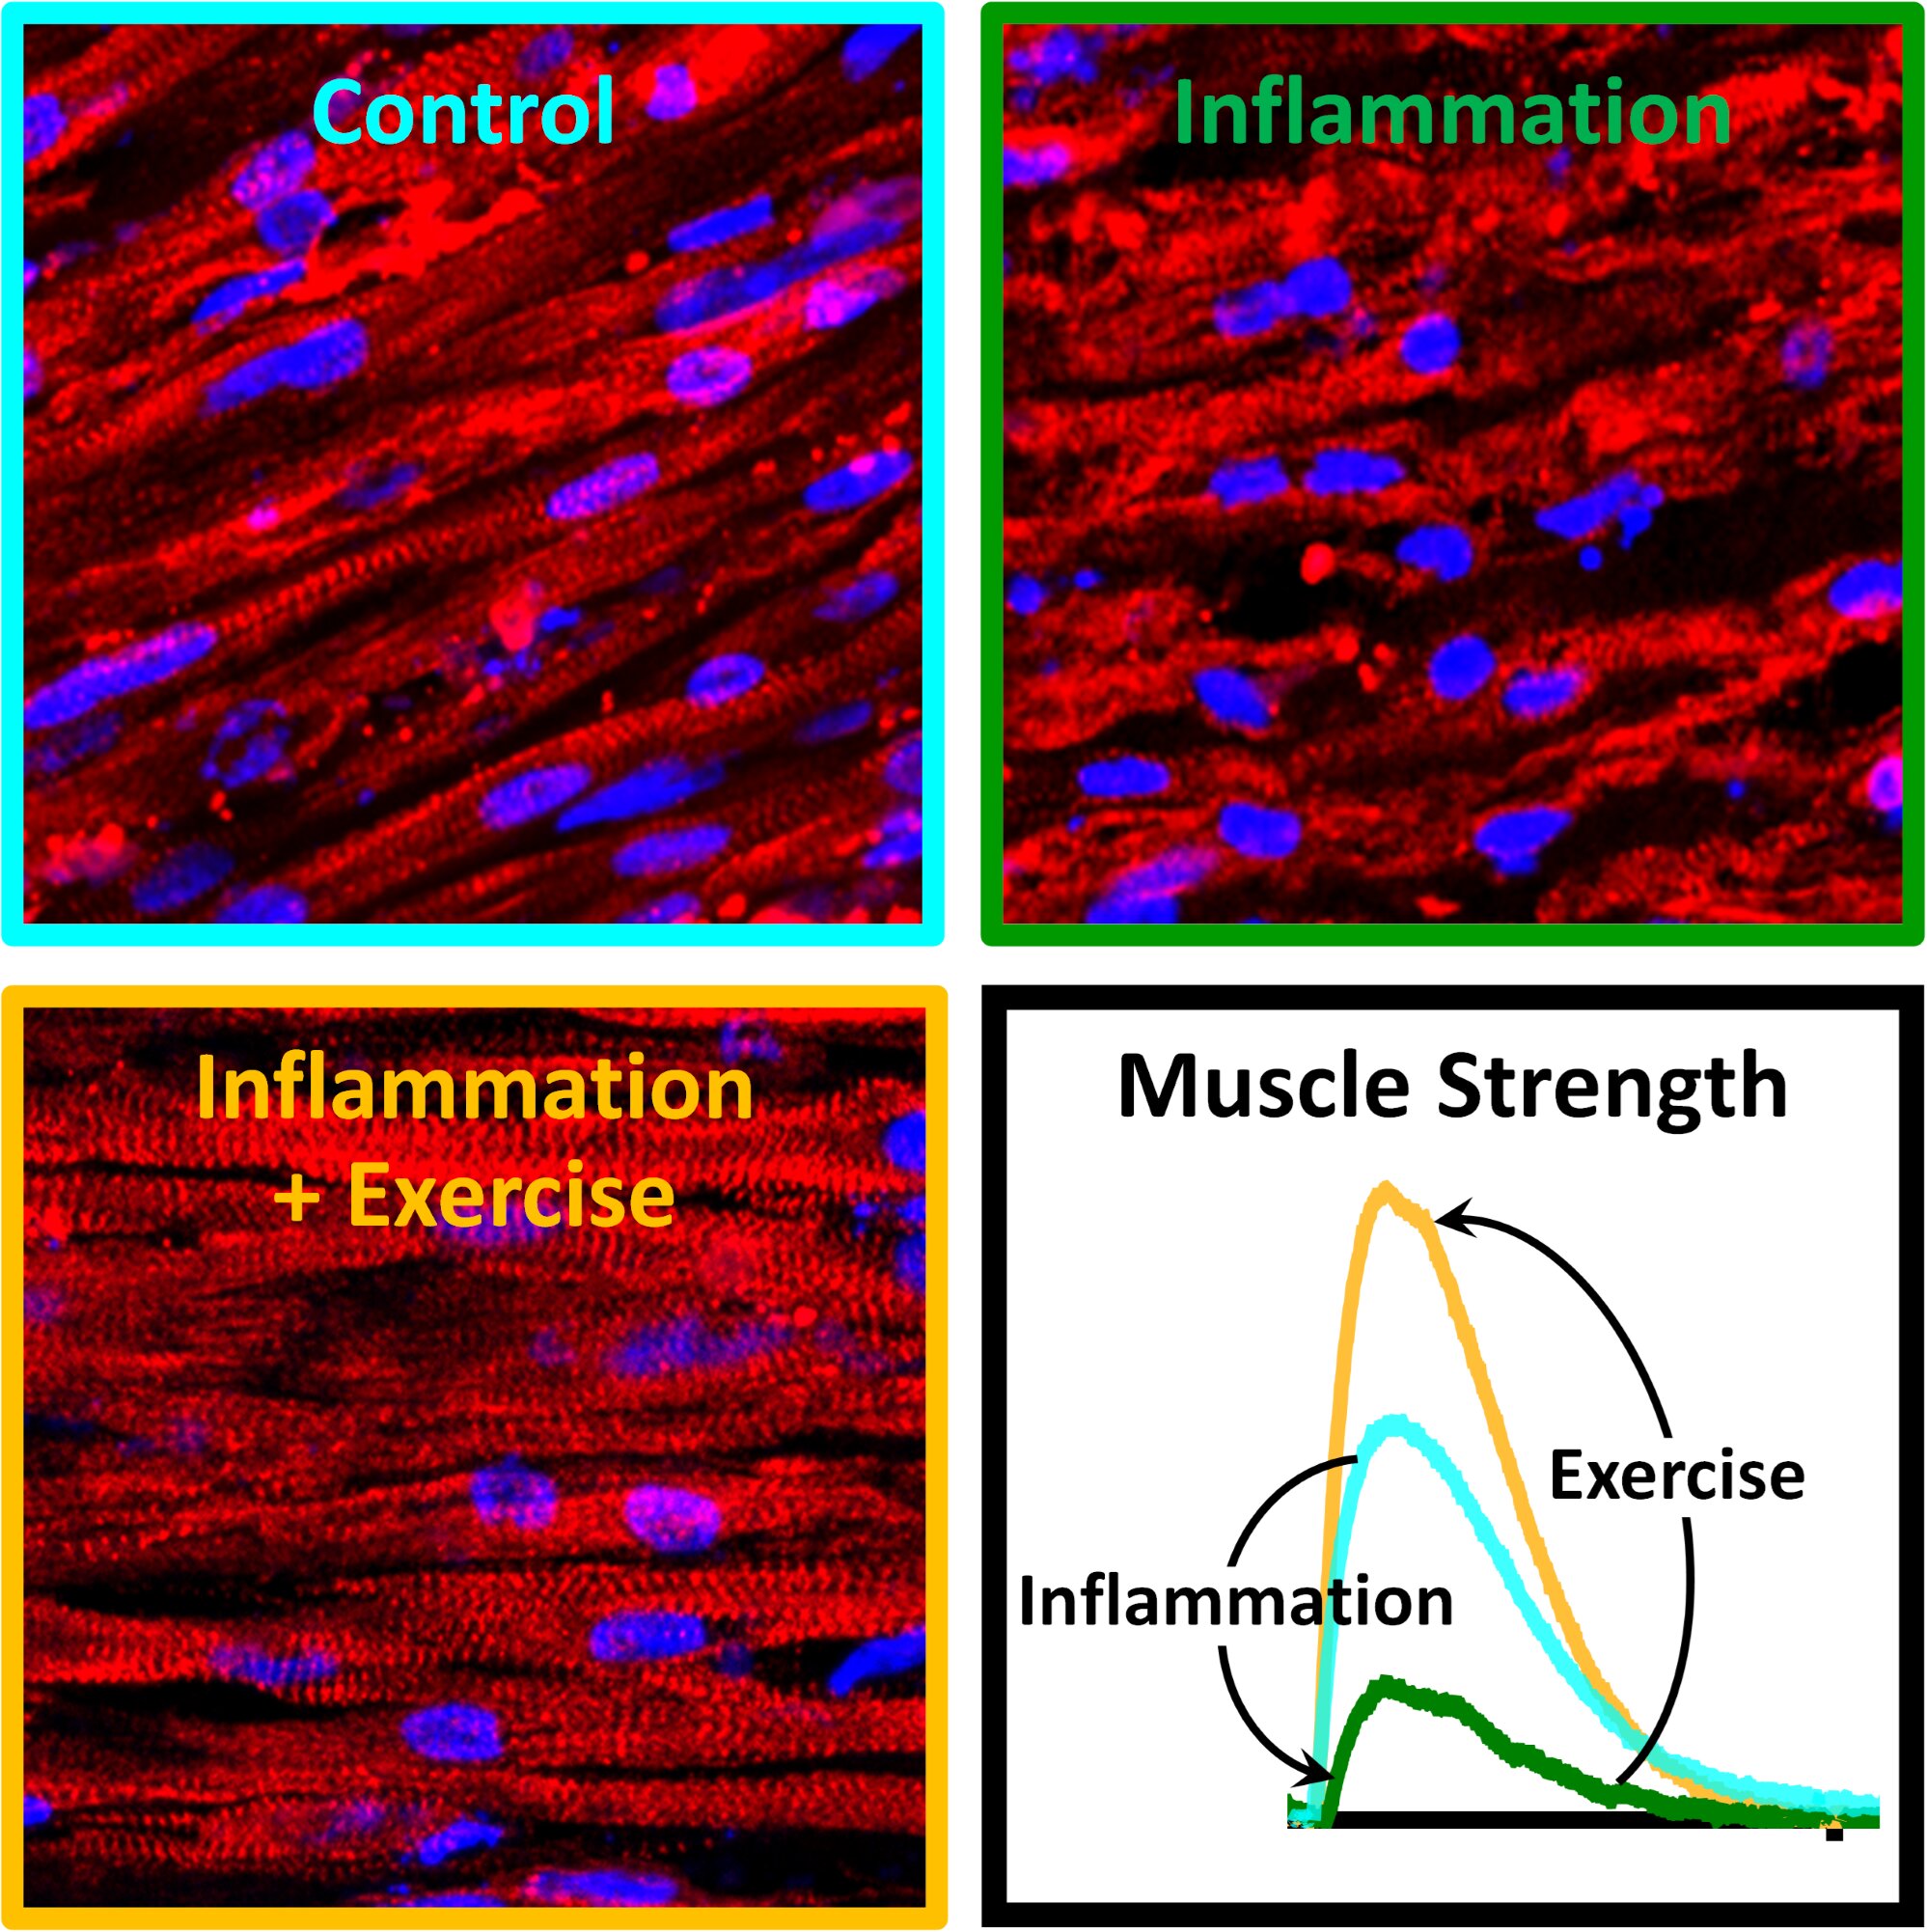 Muscle exercise fights chronic inflammation on its own